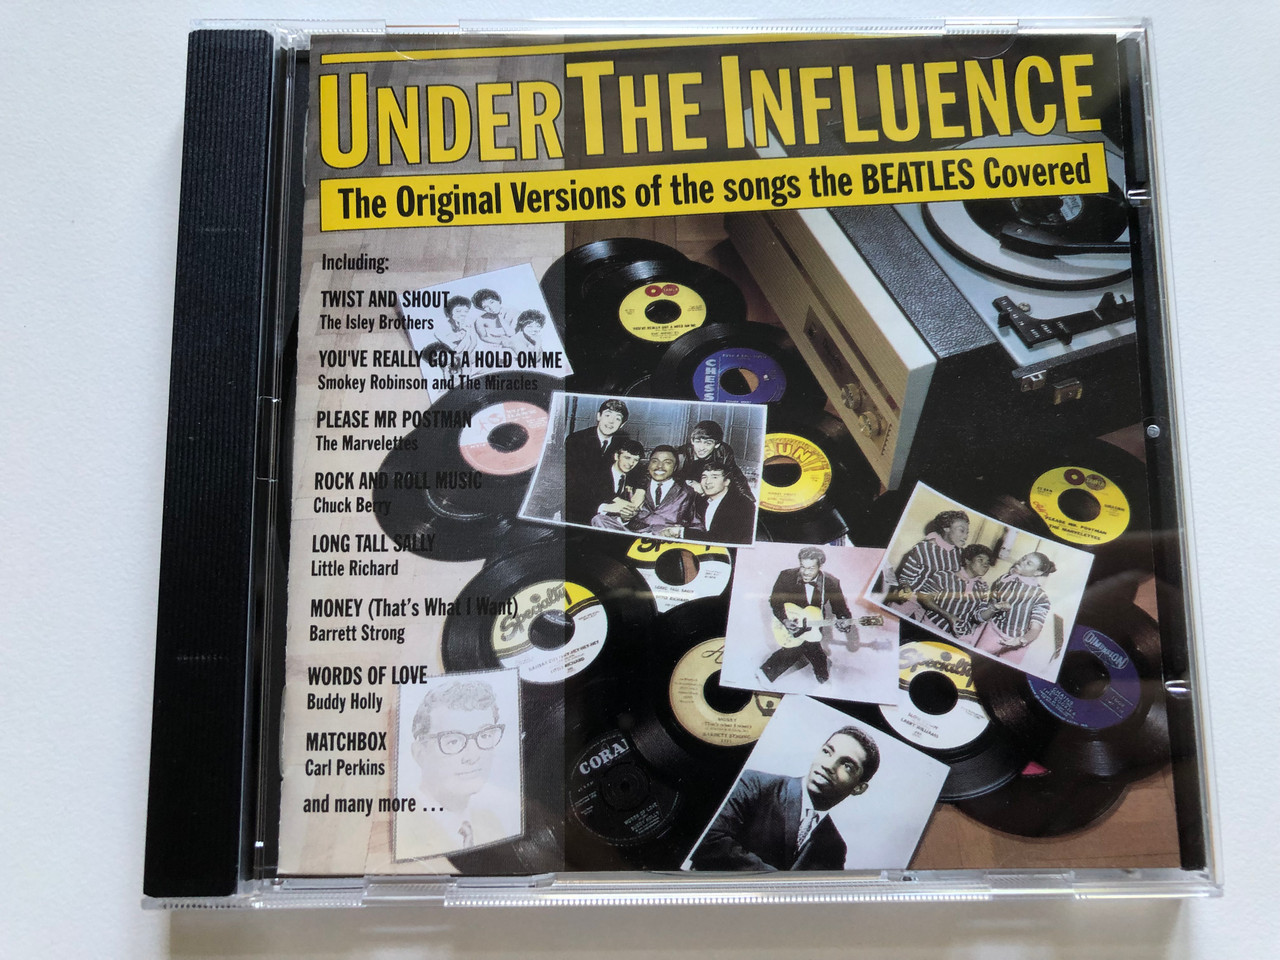 https://cdn10.bigcommerce.com/s-62bdpkt7pb/products/0/images/240791/Under_The_Influence_-_The_Original_Versions_Of_The_Songs_The_Beatles_Covered_Including_Twist_And_Shout_-_The_Isley_Brothers_Youve_Really_Got_A_Hold_On_Me_-_Smokey_Robinson_and_The_Miracle_1__34749.1658318140.1280.1280.JPG?c=2&_gl=1*d1qaag*_ga*MjA2NTIxMjE2MC4xNTkwNTEyNTMy*_ga_WS2VZYPC6G*MTY1ODMxNDU5Ni40OTAuMS4xNjU4MzE4MTM1LjYw